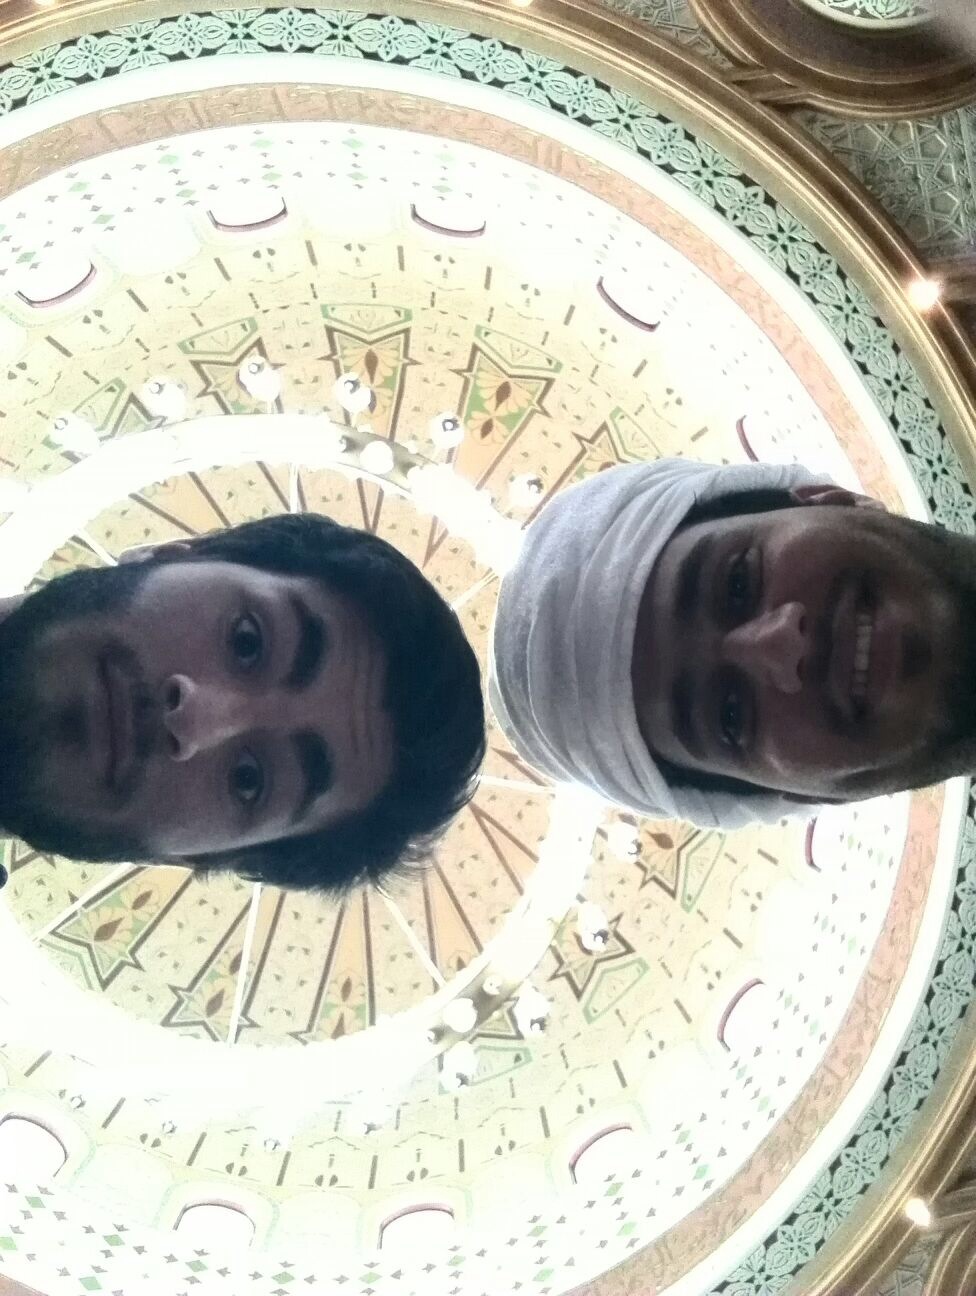 My language partner, Ahmed, and I with the ornate ceiling of a mosque above us.